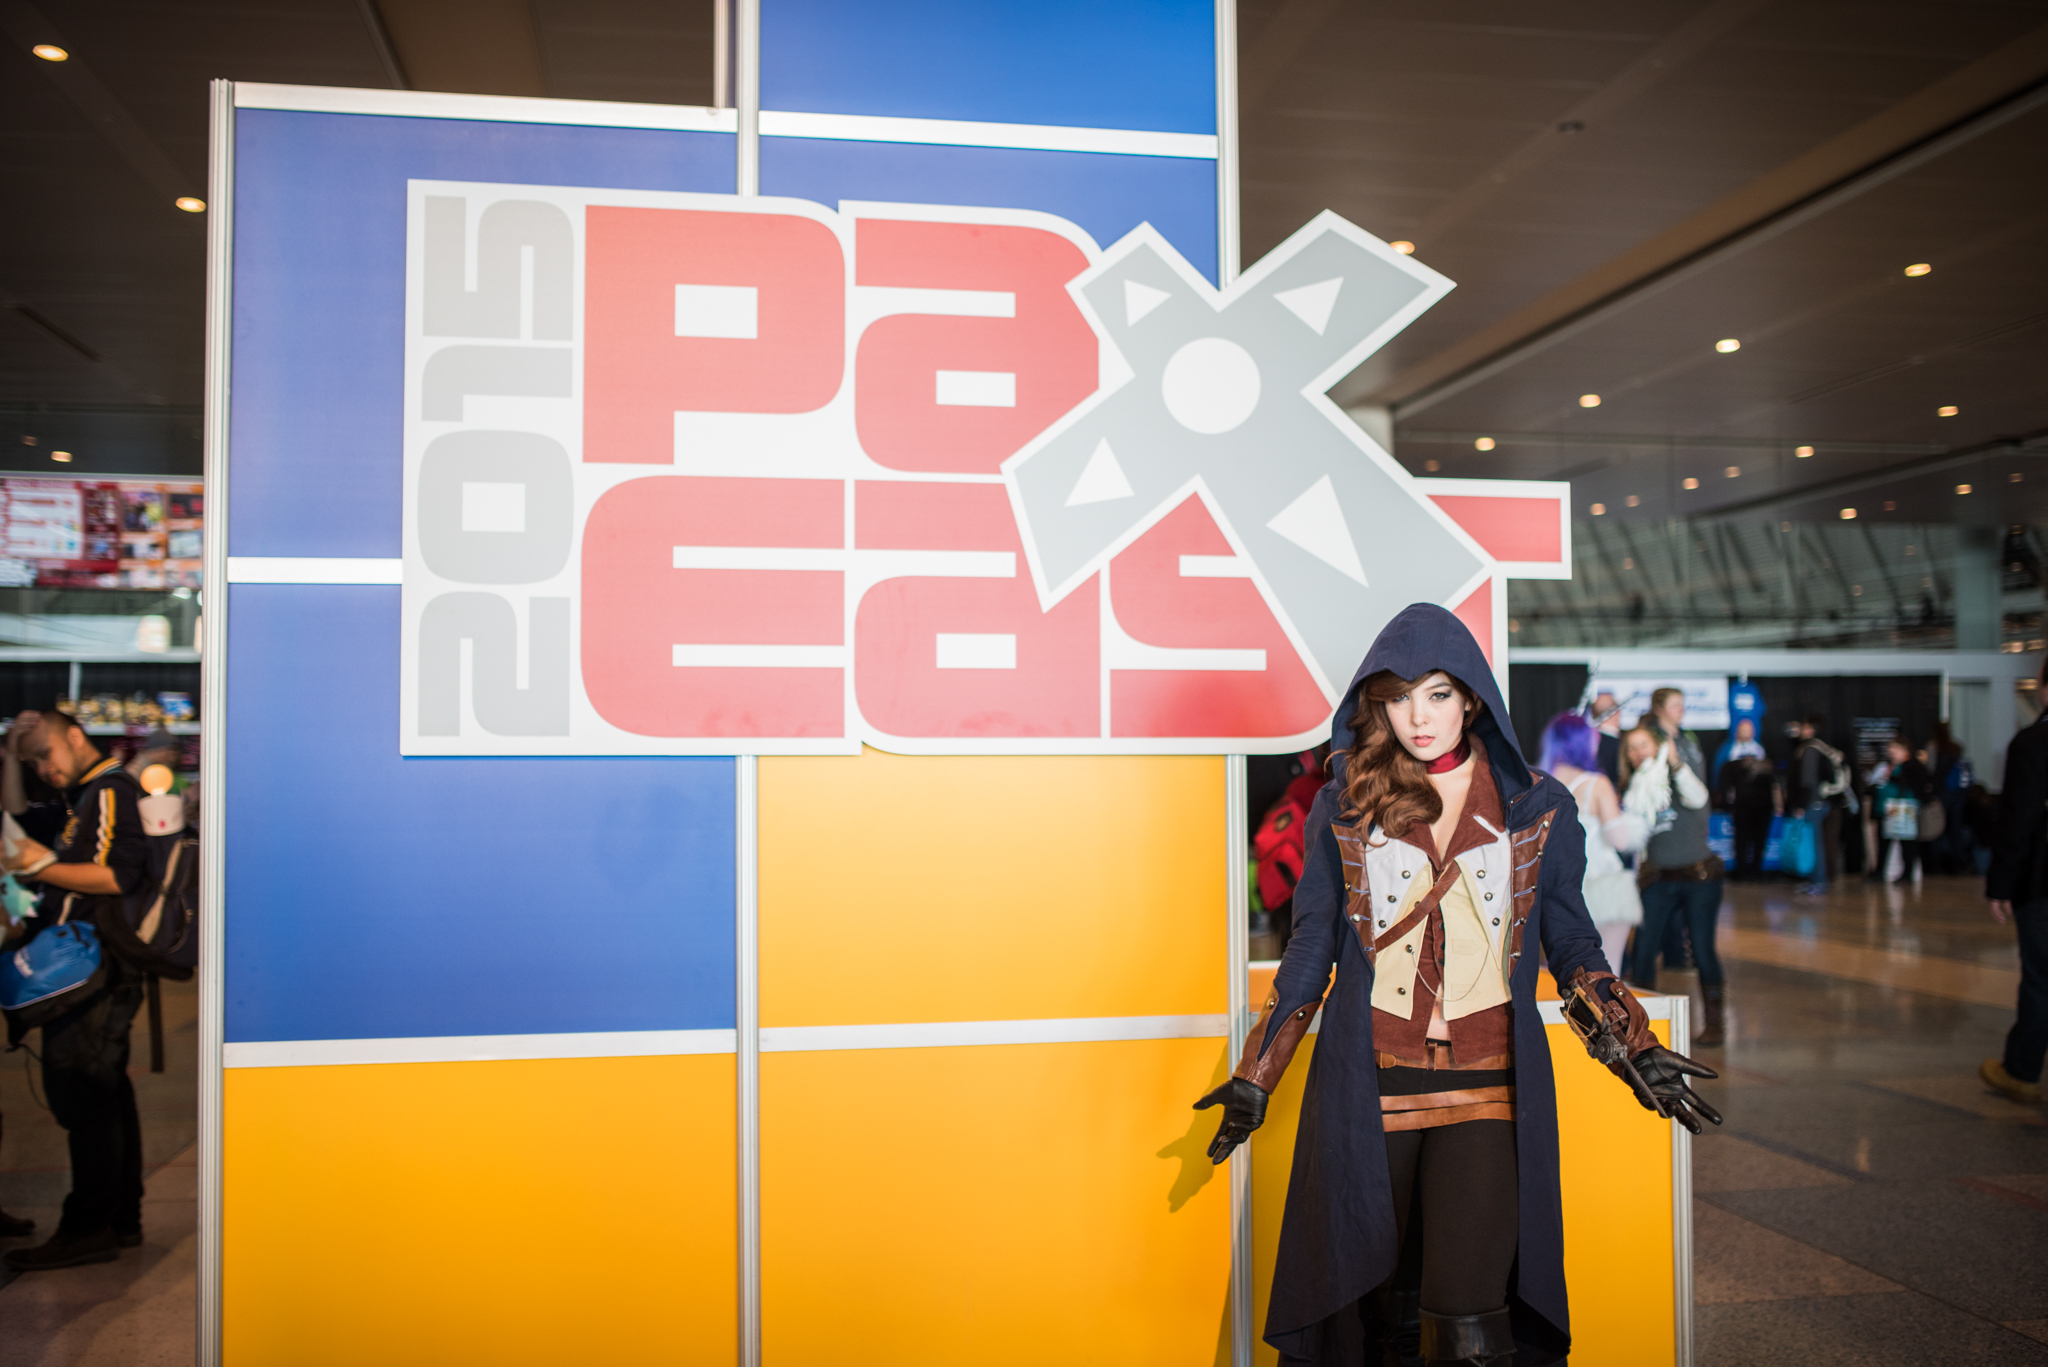 The Coolest Cosplay At PAX East, Day 3